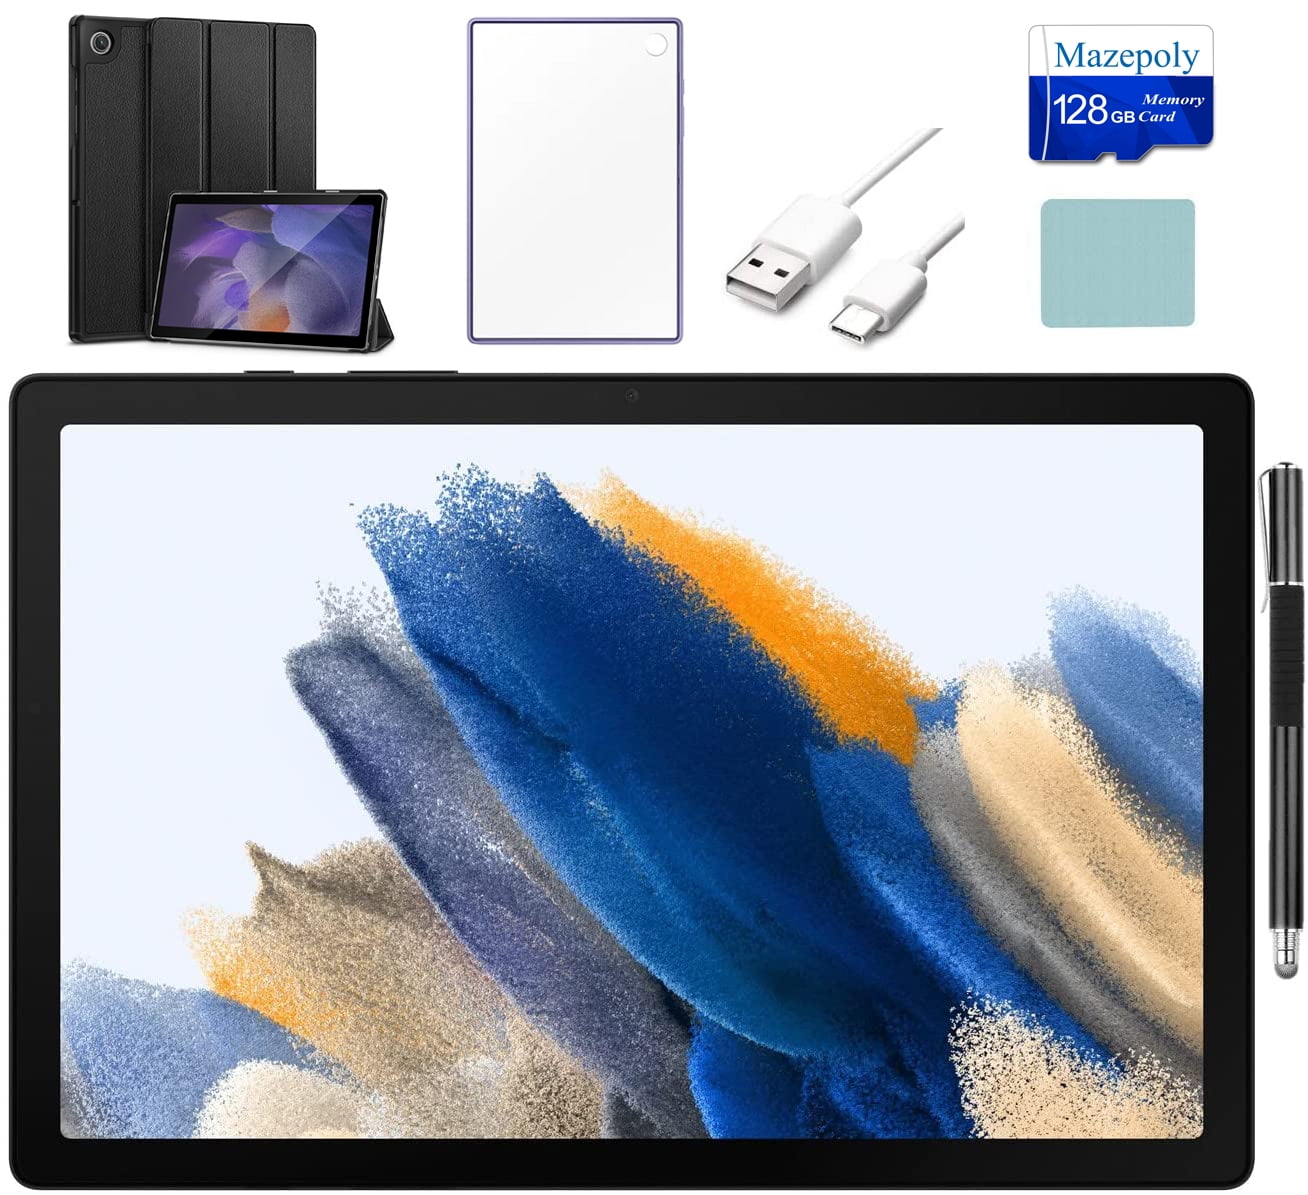 Samsung Galaxy Tab A8 10.5-inch Touchscreen (1920x1200) Wi-Fi Tablet Bundle, Octa-Core Processor, 3GB RAM, Memory, Bluetooth, Android 11 OS, Dark Gray with Mazepoly Accessories - Walmart.com